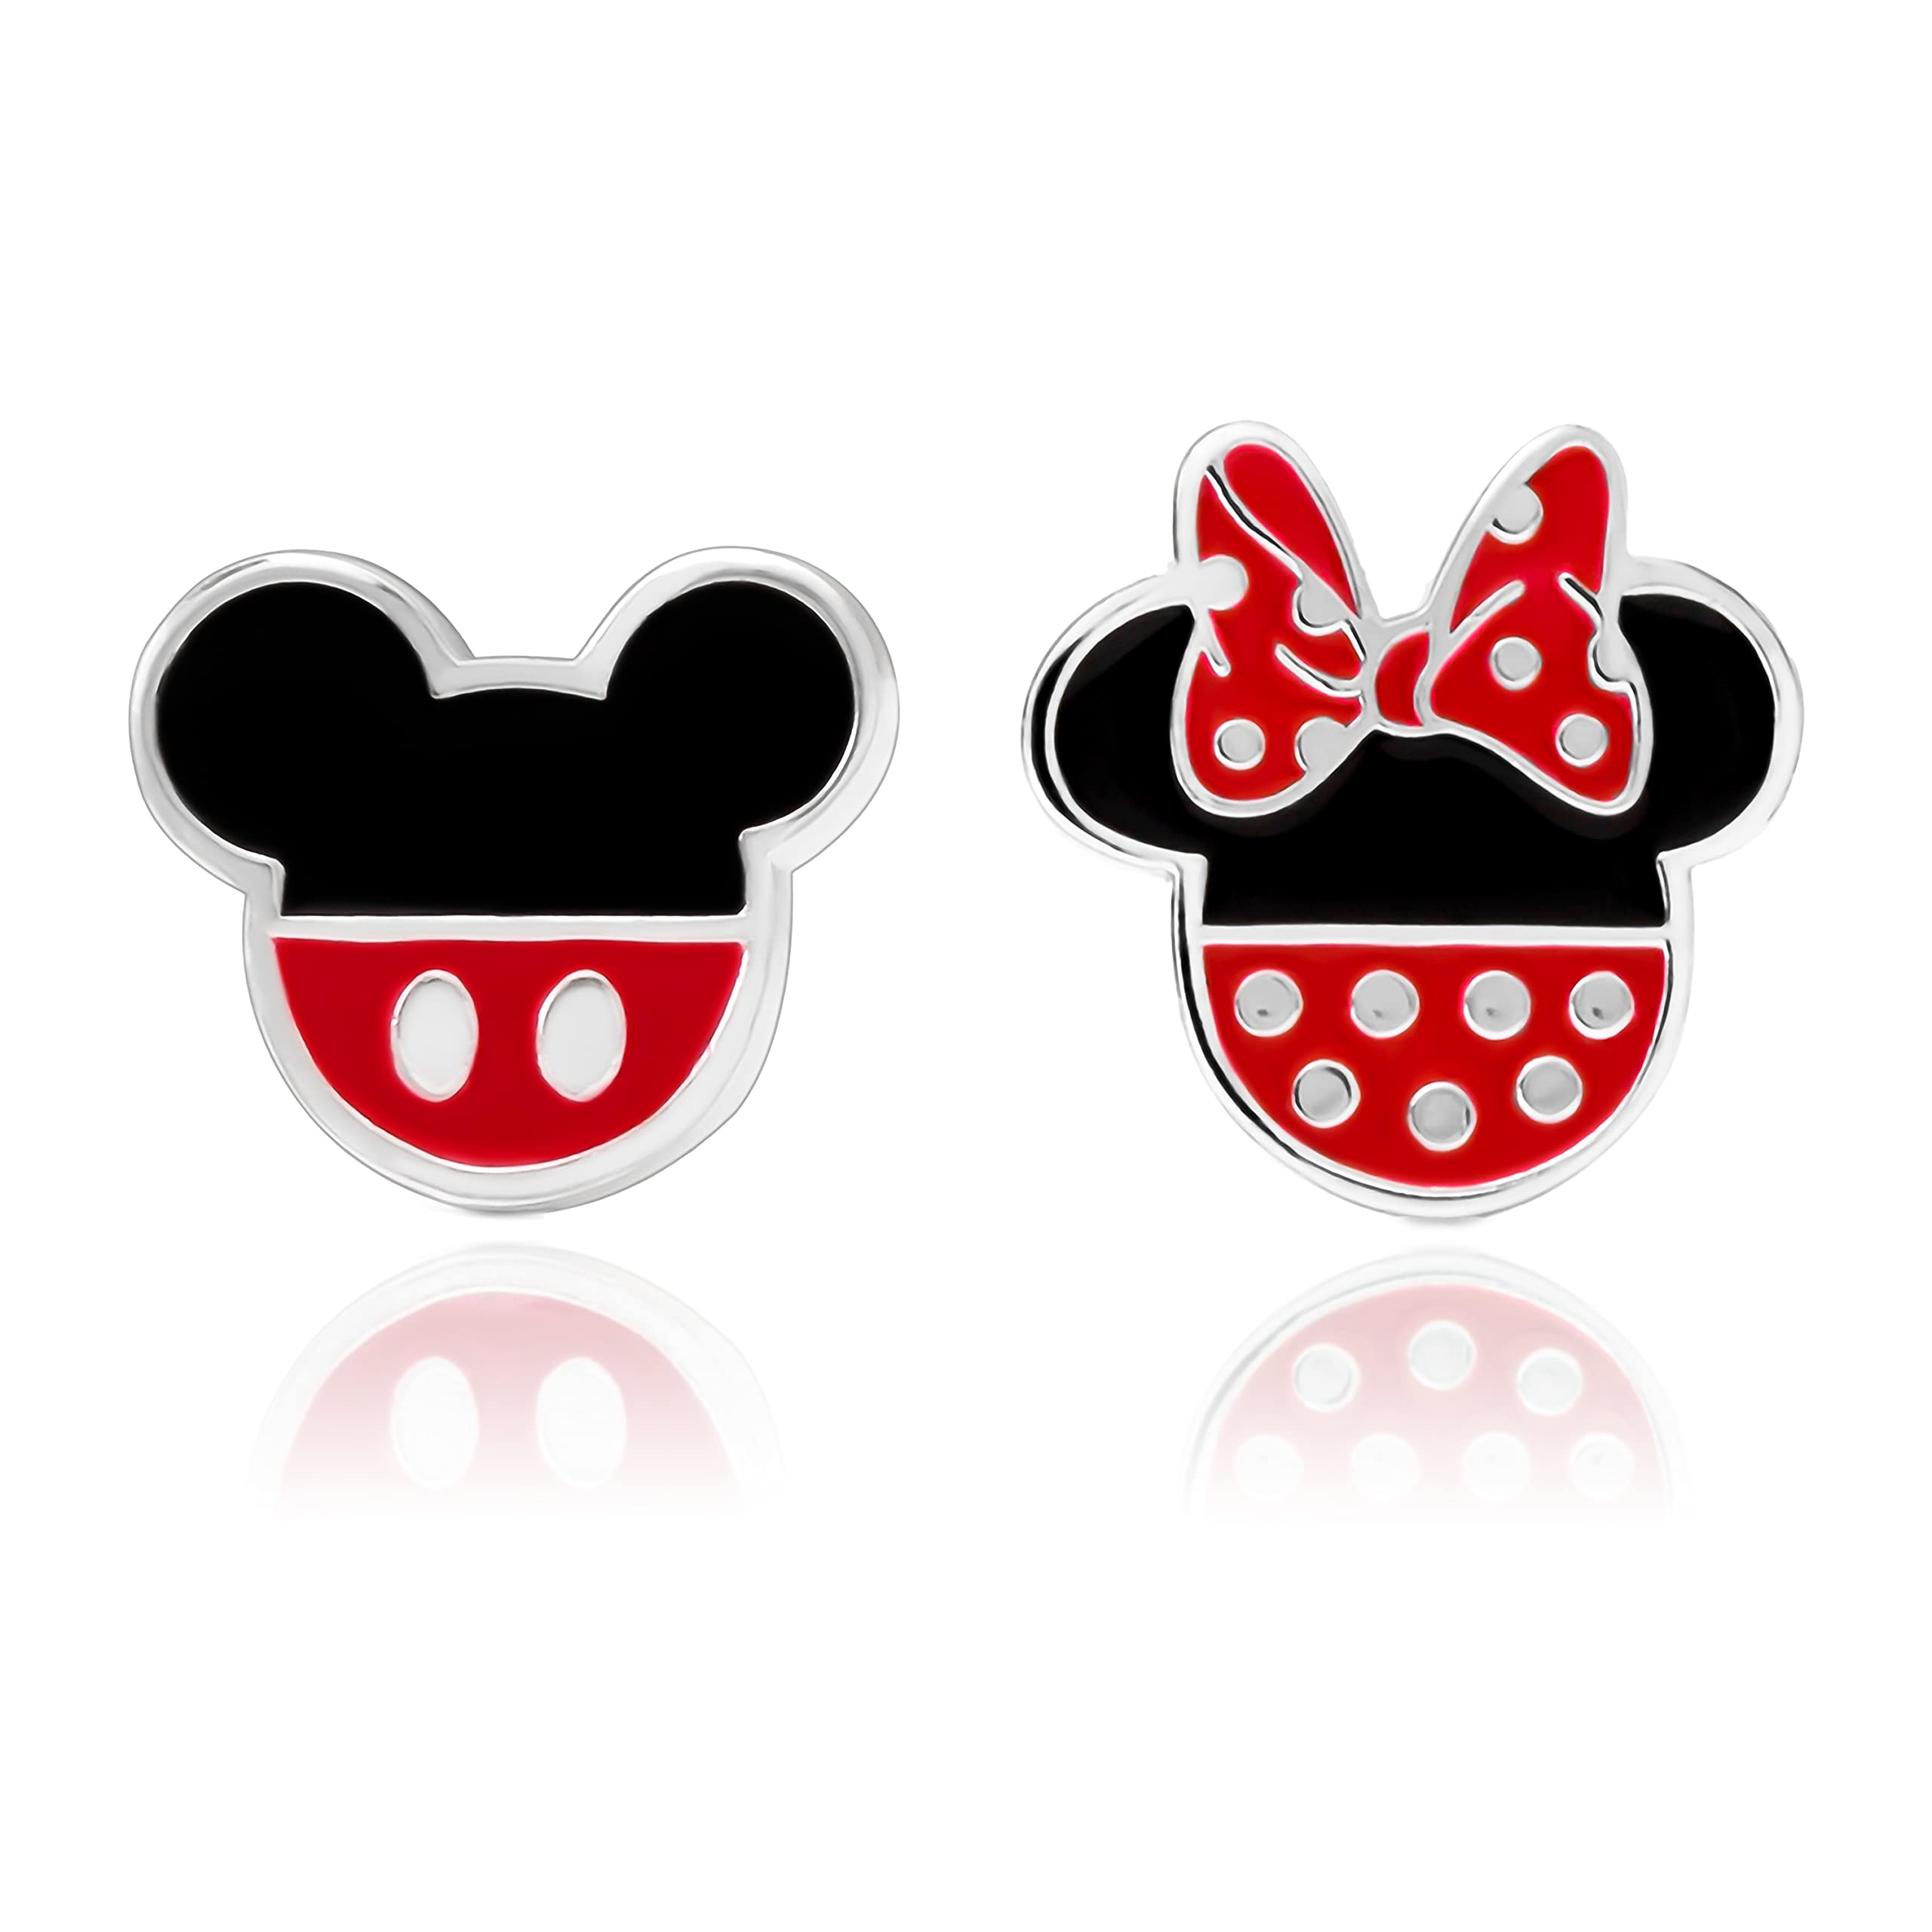 Disney Mismatched Stud Earrings, Mickey and Minnie Mouse, Silver Plated, Officially Licensed